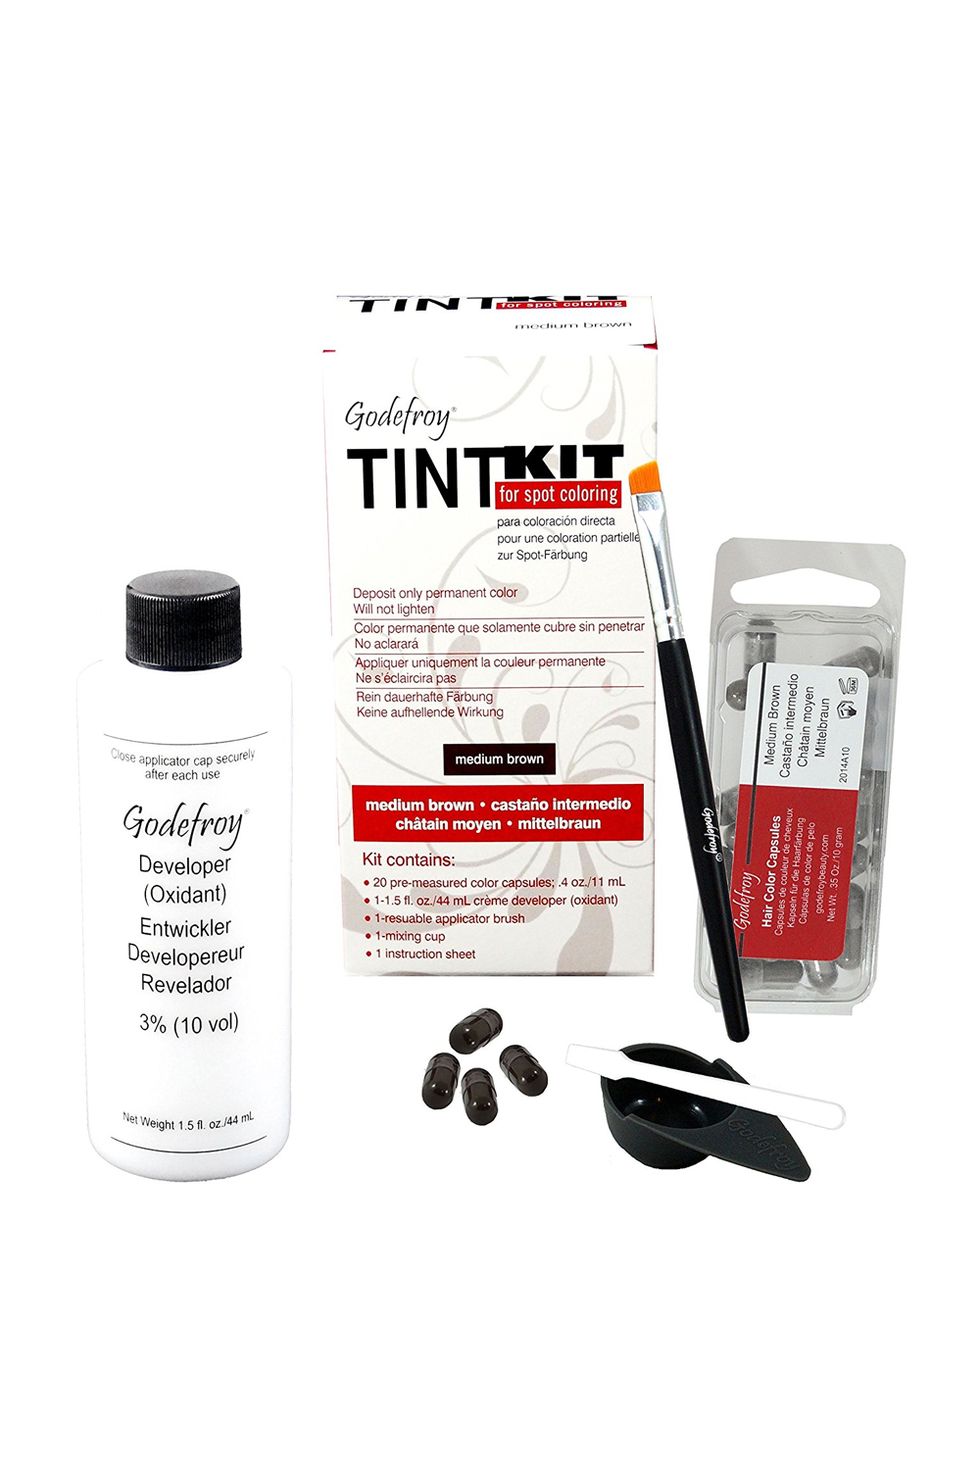 <p>Though this tint is lacking in the fancy-packaging department, it makes up for it by being a true, salon-level brow tint&nbsp;that lasts for weeks. Plus, each easy-to-follow kit contains 20 applications, making it shockingly affordable. </p><p><i data-redactor-tag="i">Godefroy Tint Kit, $14.18</i></p><p><strong data-redactor-tag="strong">BUY IT: <a href="https://www.amazon.com/gp/product/B0131FFTMO?">amazon.com</a>.&nbsp;</strong><span data-redactor-tag="span"></span></p>